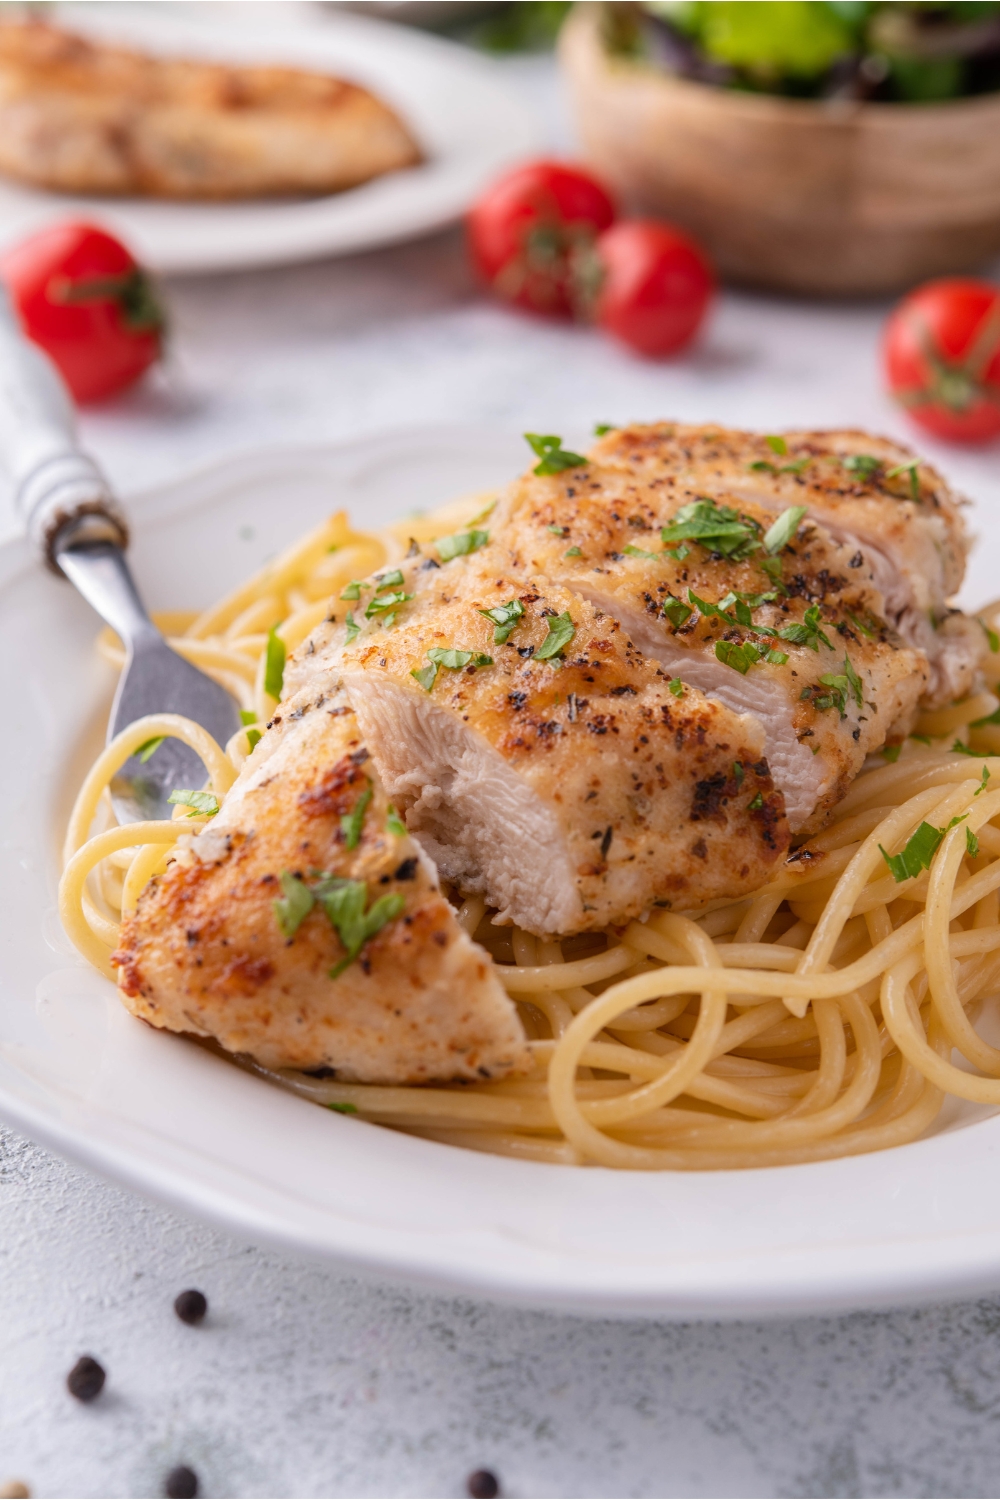 A sliced pan-fried chicken breast atop a bed of spaghetti noodles on a white plate with a fork on the plate. The chicken is garnished with fresh green herbs.